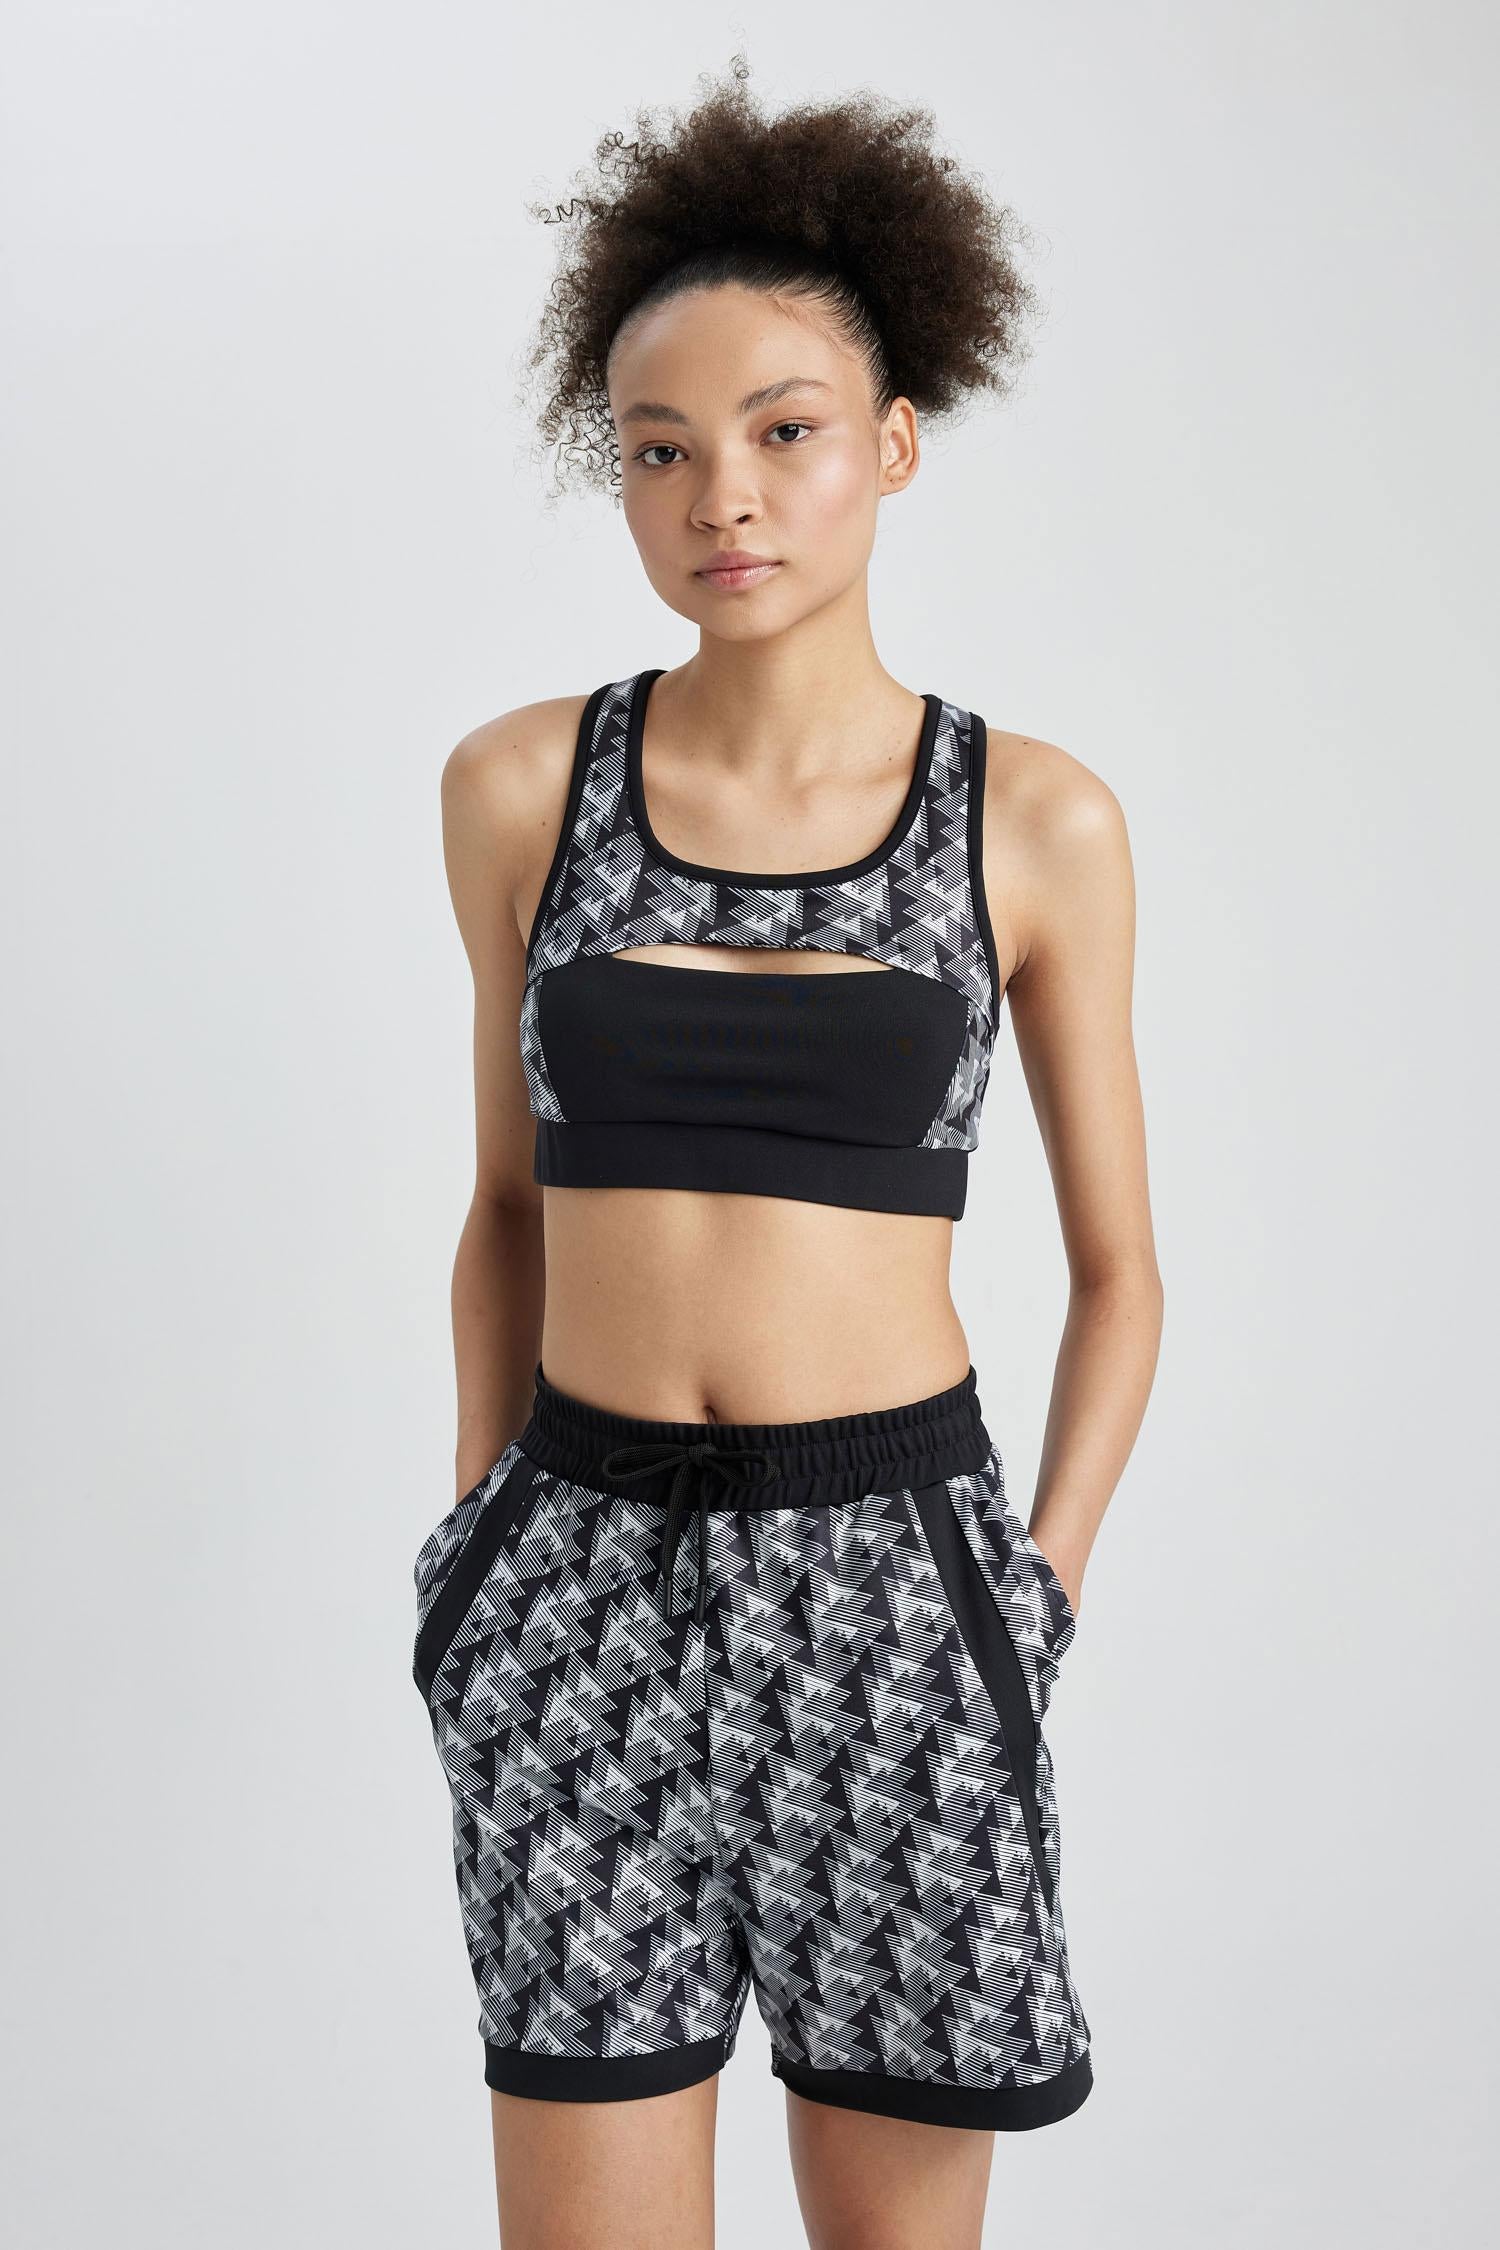 ASOS 4505 medium support sports bra with racer back in black matte and  shine